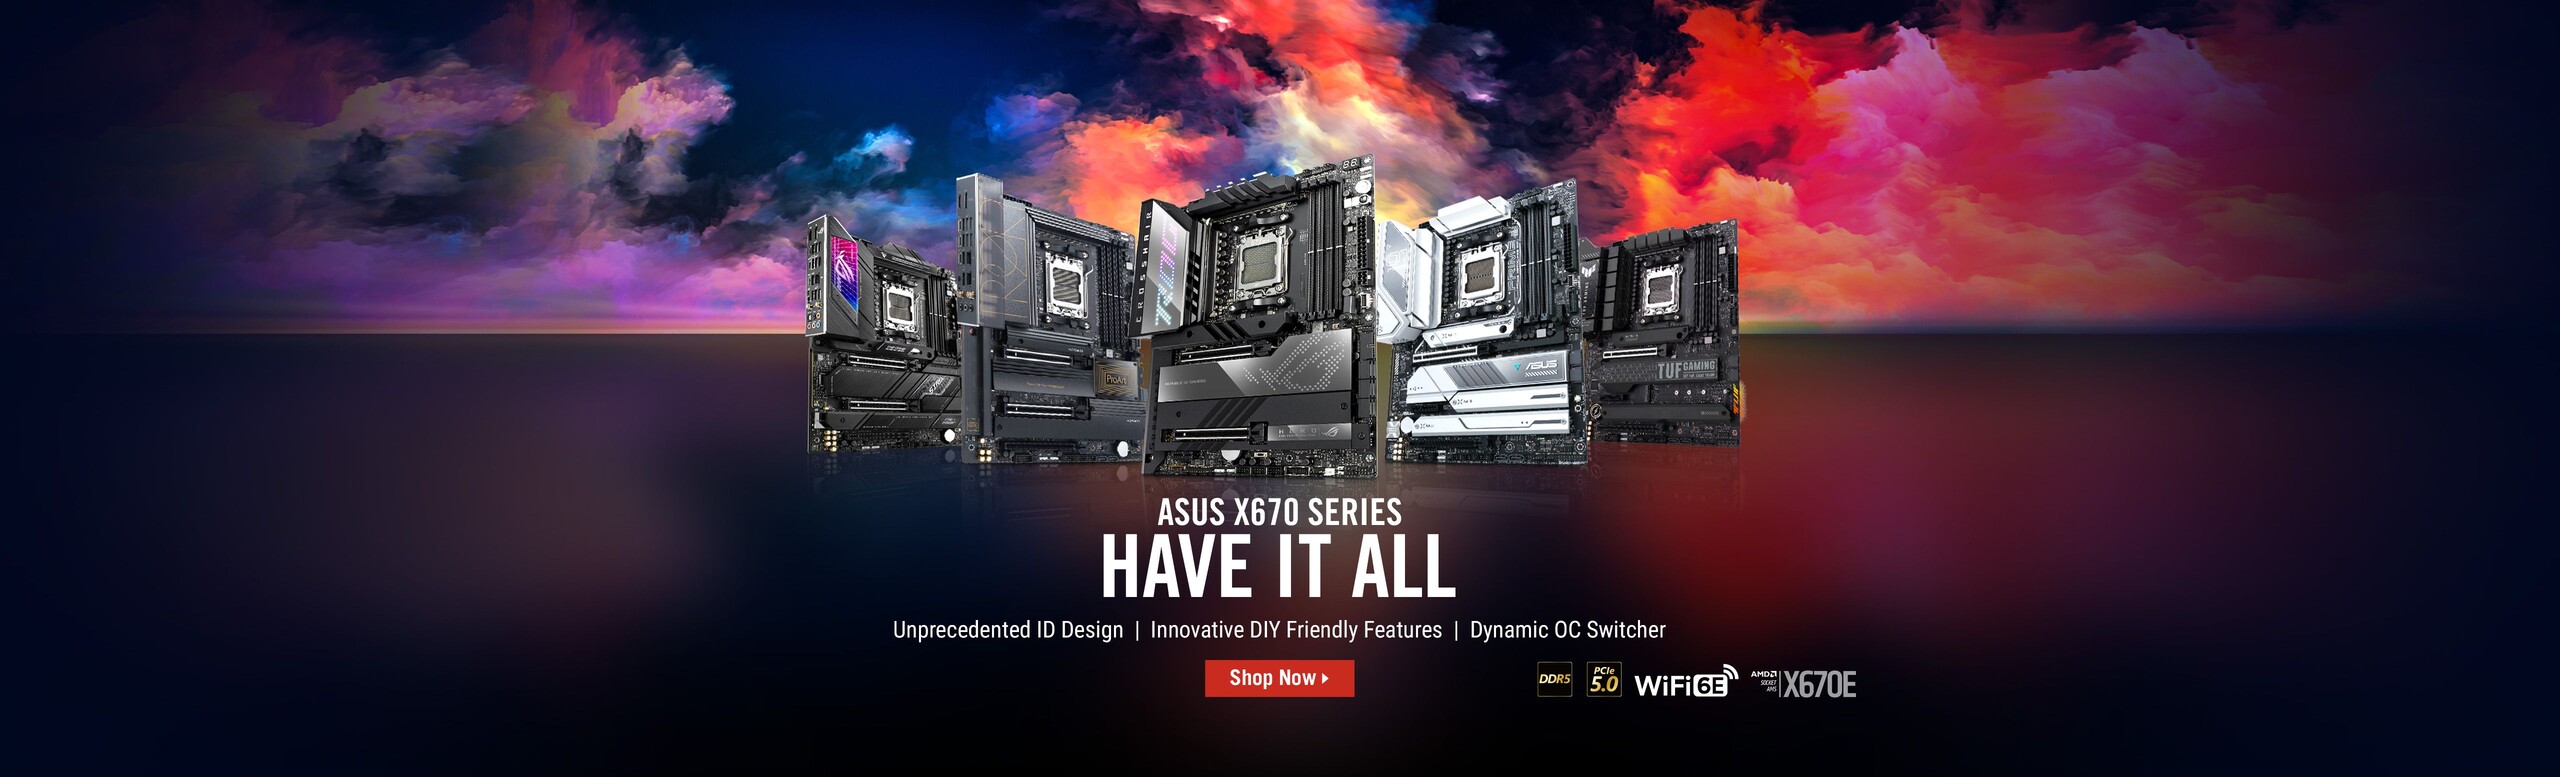 Five ASUS X670 motherboards from ROG Strix, TUF, ProArt and Prime lines float in sunset with DDR5, PCIe 5.0, Wi-Fi 6E logos.